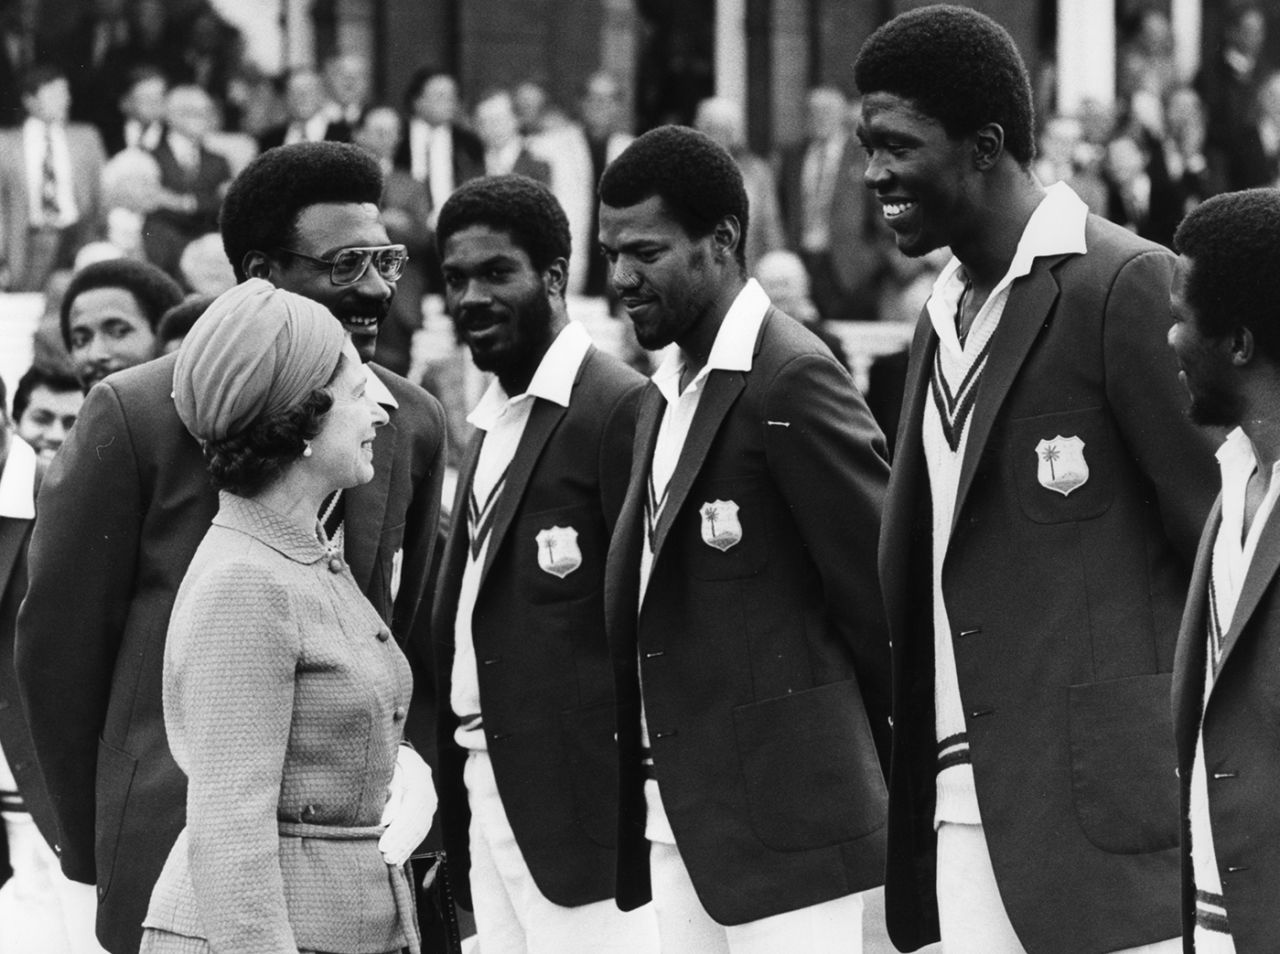 West Indies captain Clive Lloyd introduces his team-mate Joel Garner to Queen Elizabeth, England v West Indies, 2nd Test, Lord's, 4th day, June 23, 1980